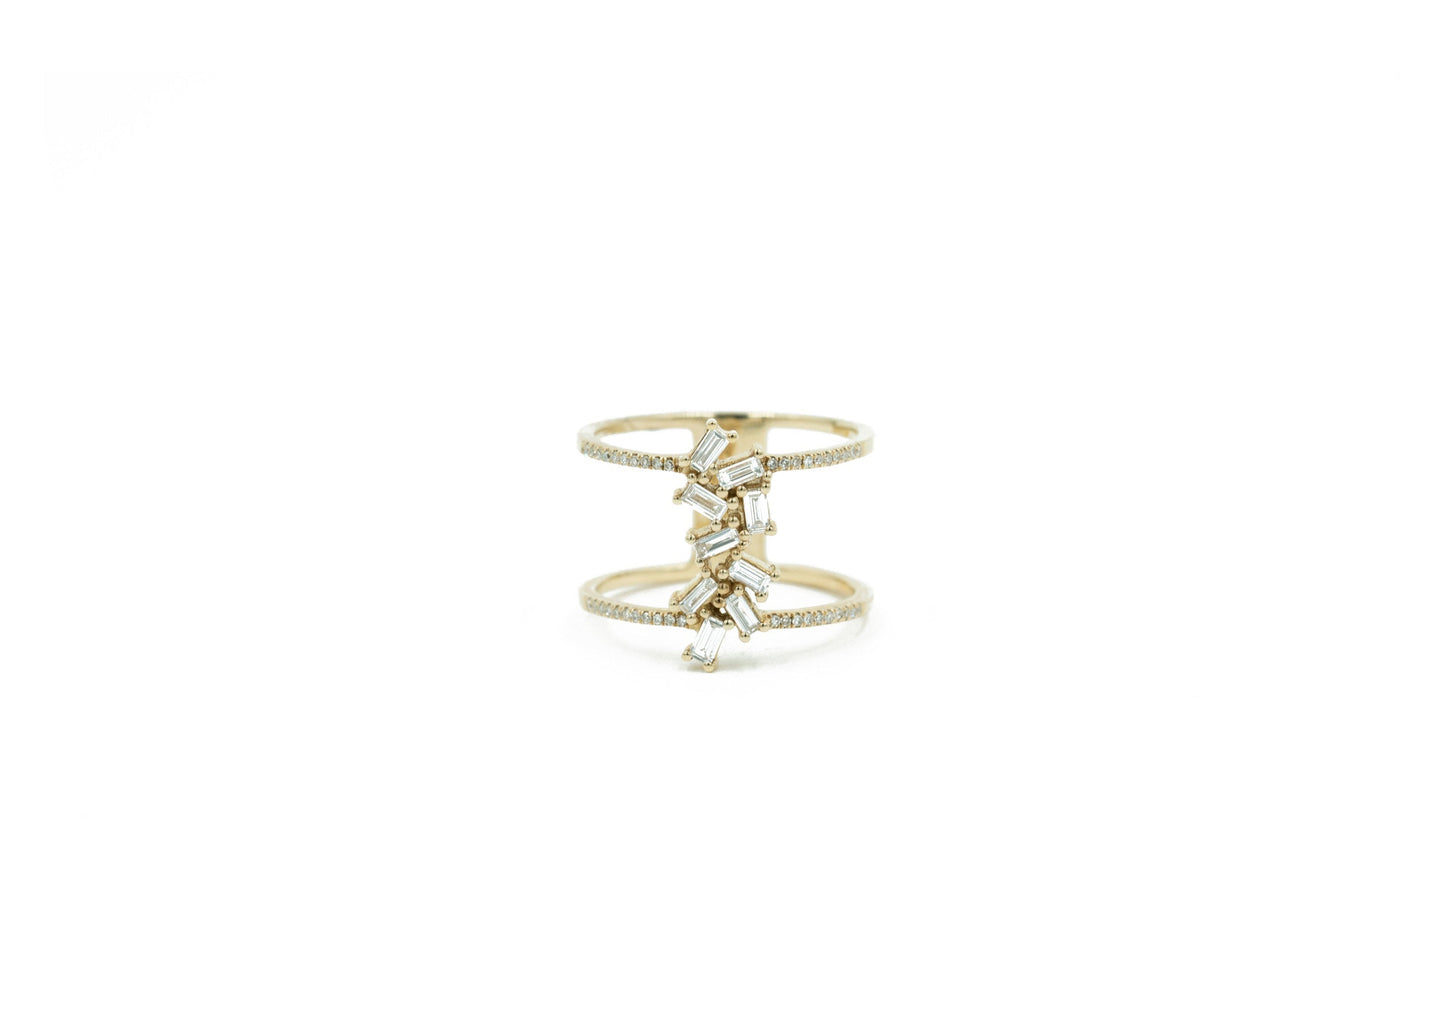 14KT Yellow Gold Diamond Pave and Baguette Diamond Ring